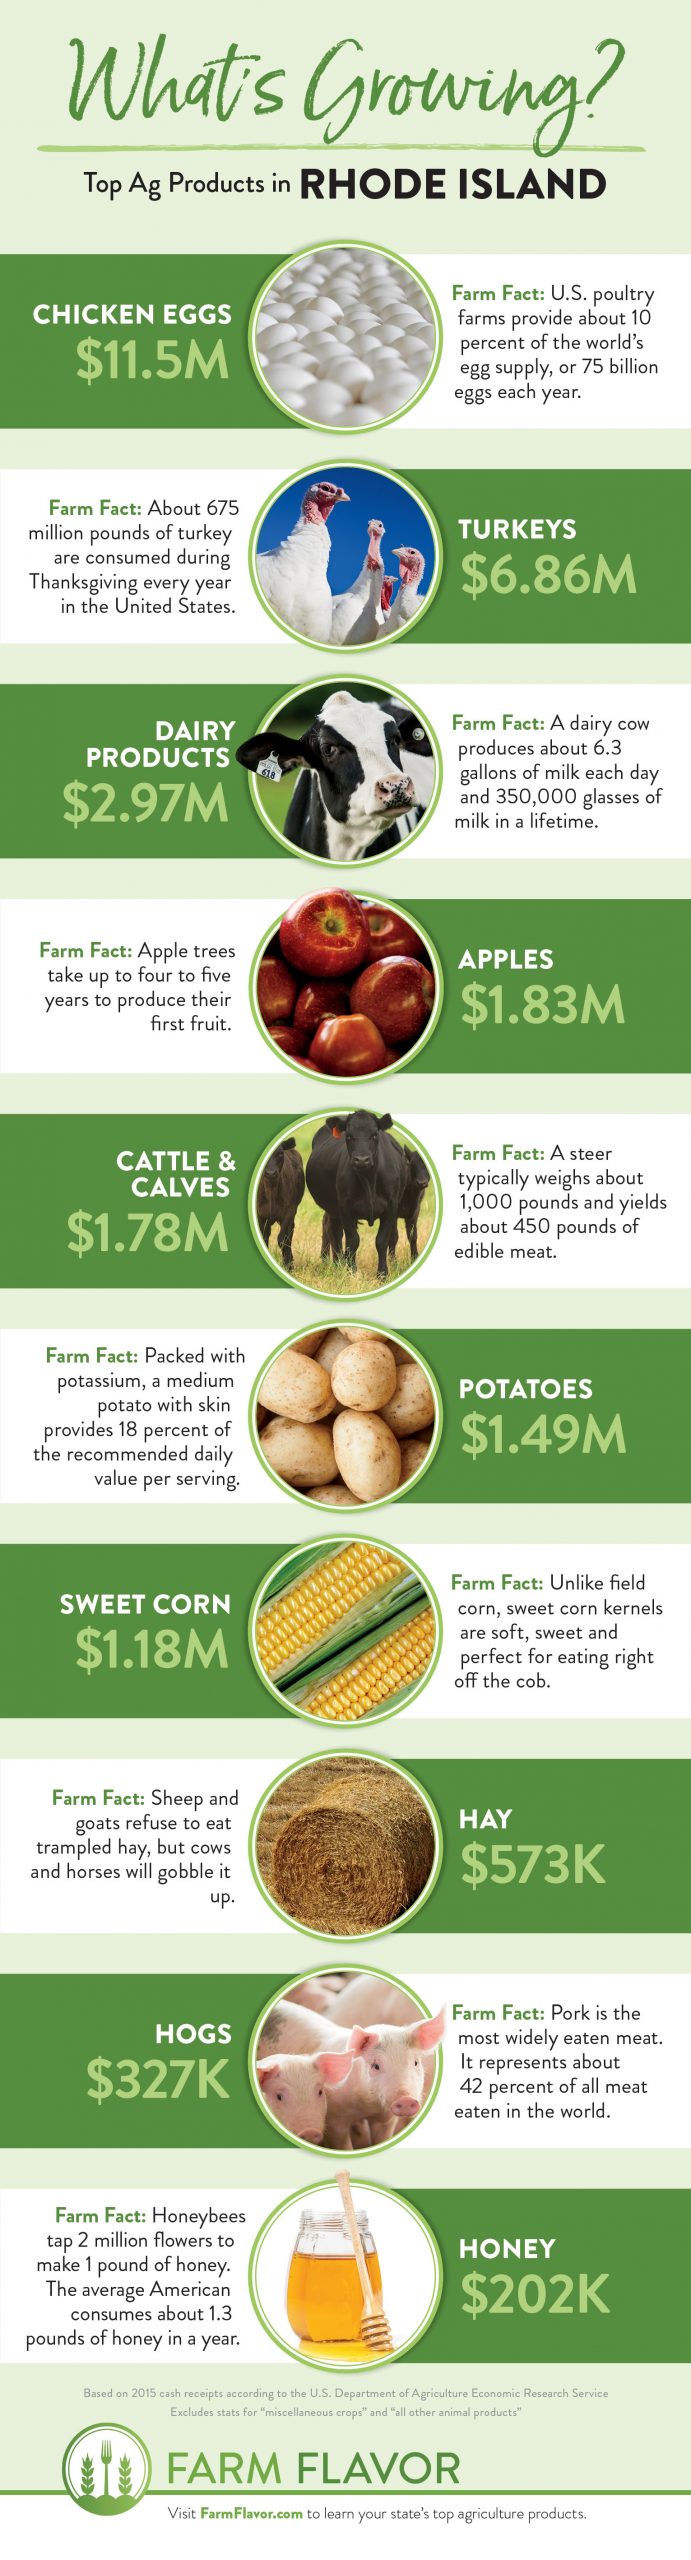 Rhode Island Top 10 ag products